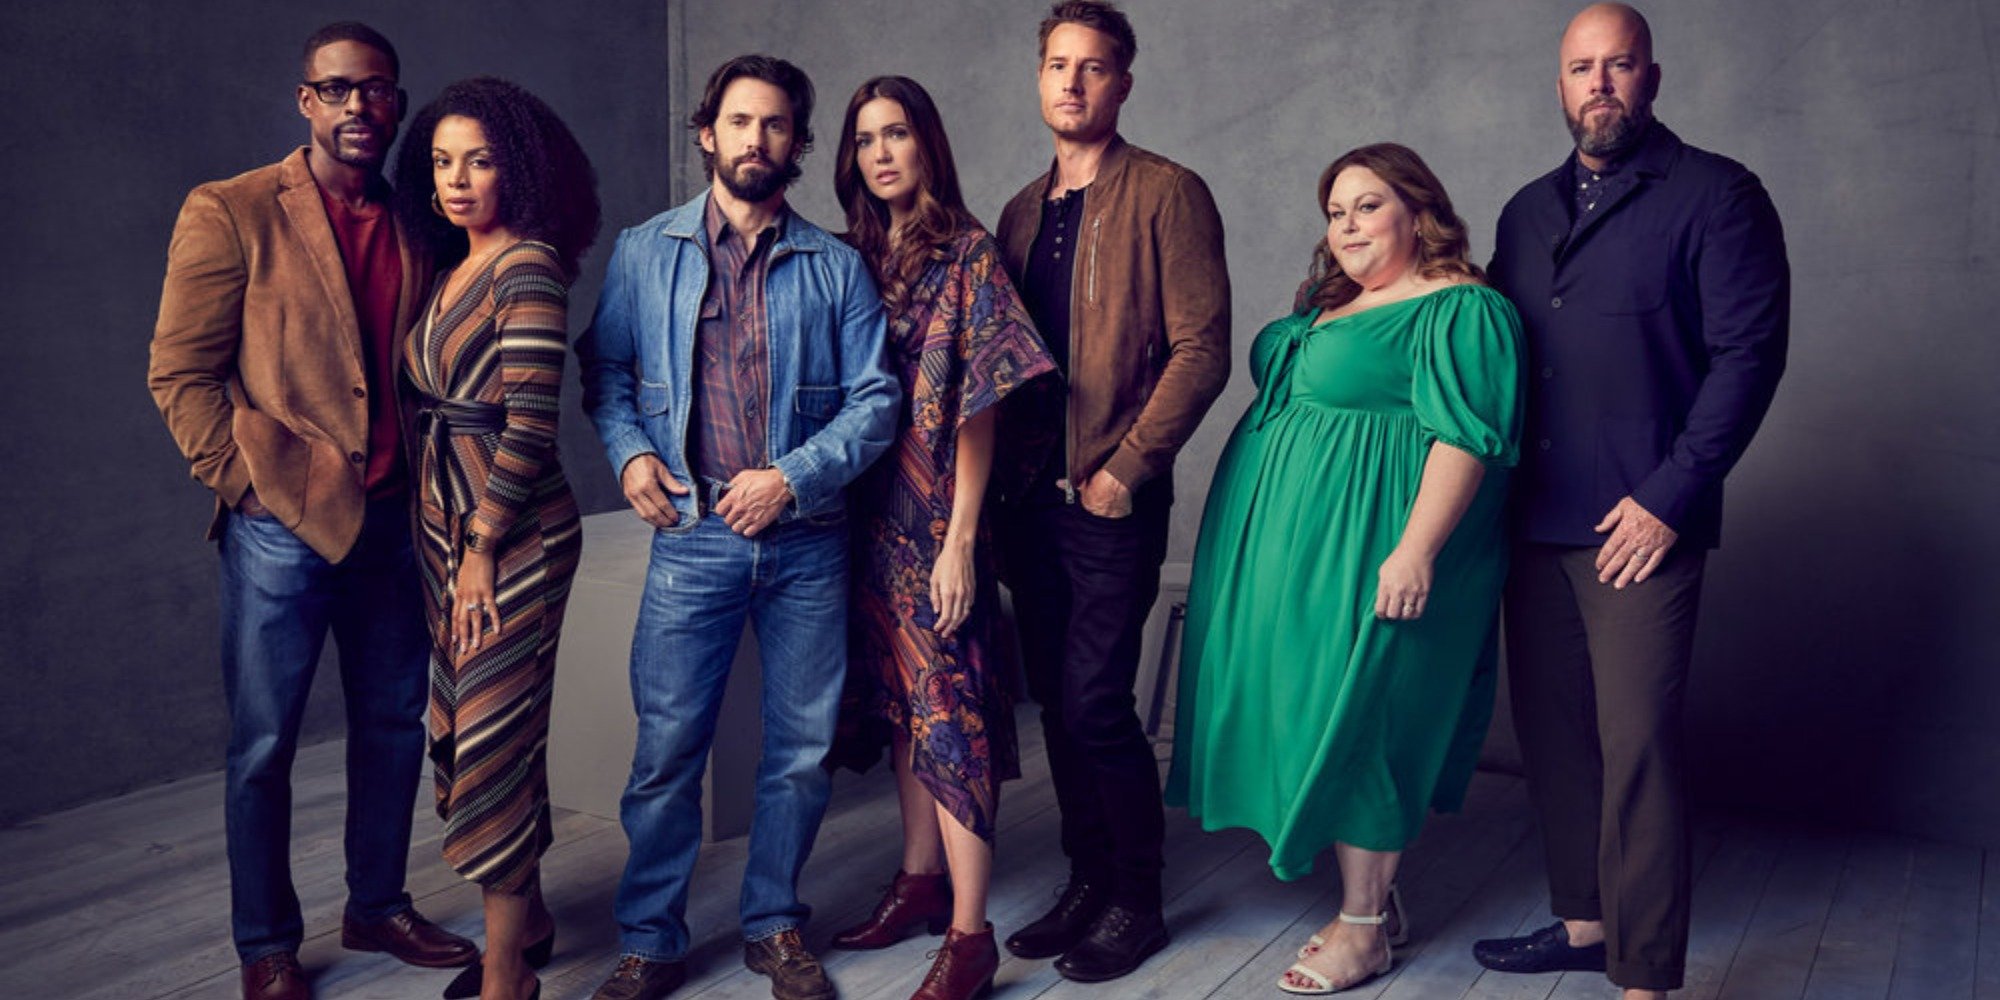 ‘This Is Us’ Return: Viewers ‘Helped’ By Three-Week Olympic Break Before Show Returns Claims NBC Head